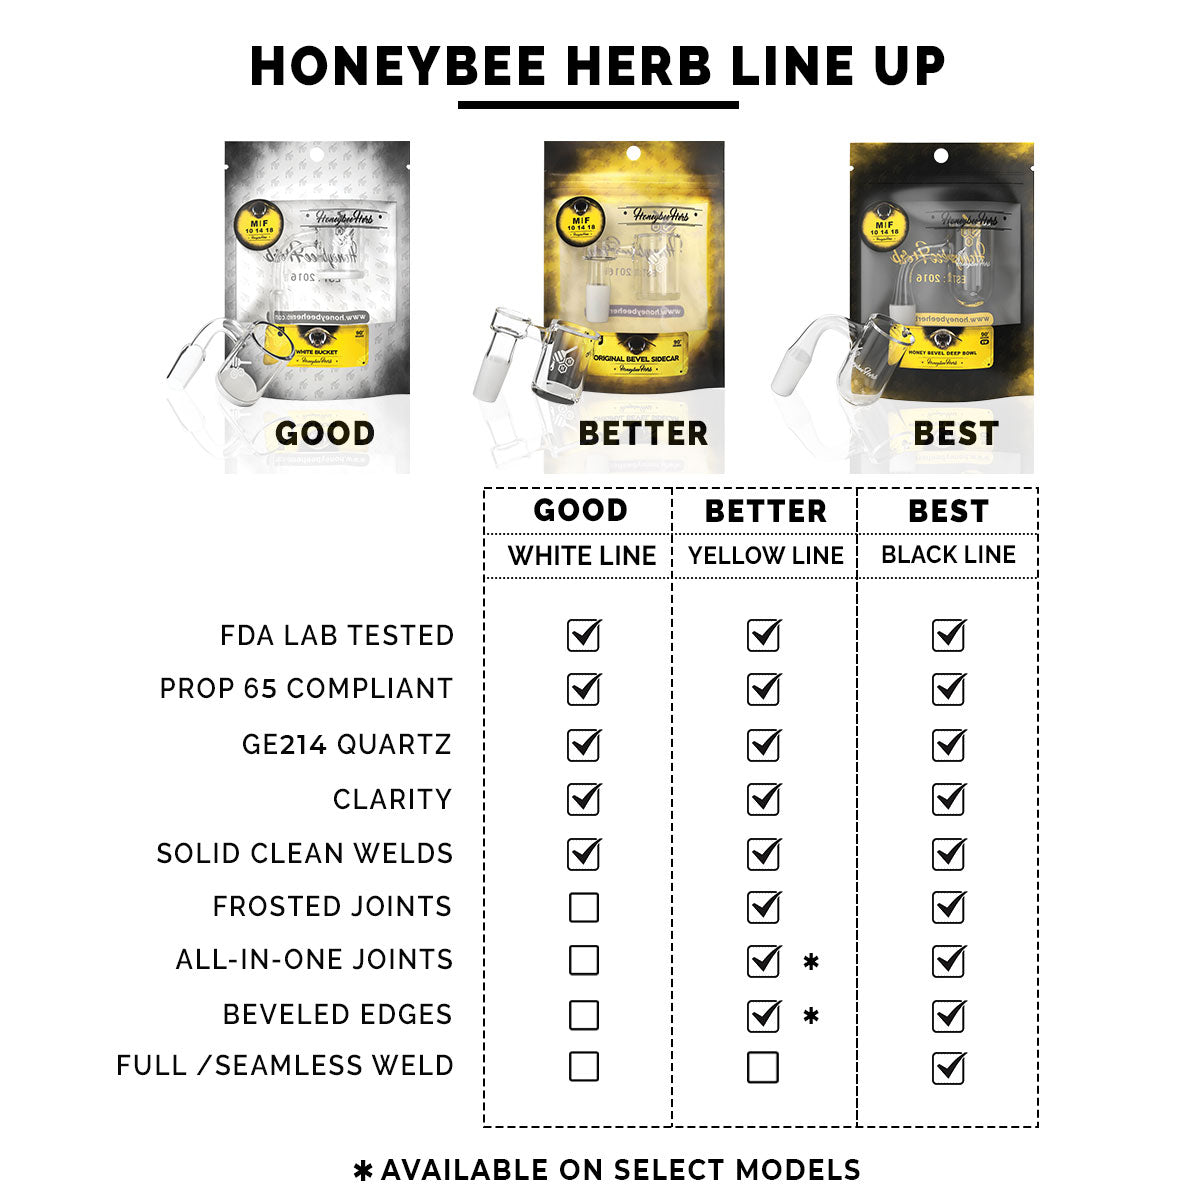 Honeybee Herb quartz bangers comparison chart, showcasing quality tiers from good to best.